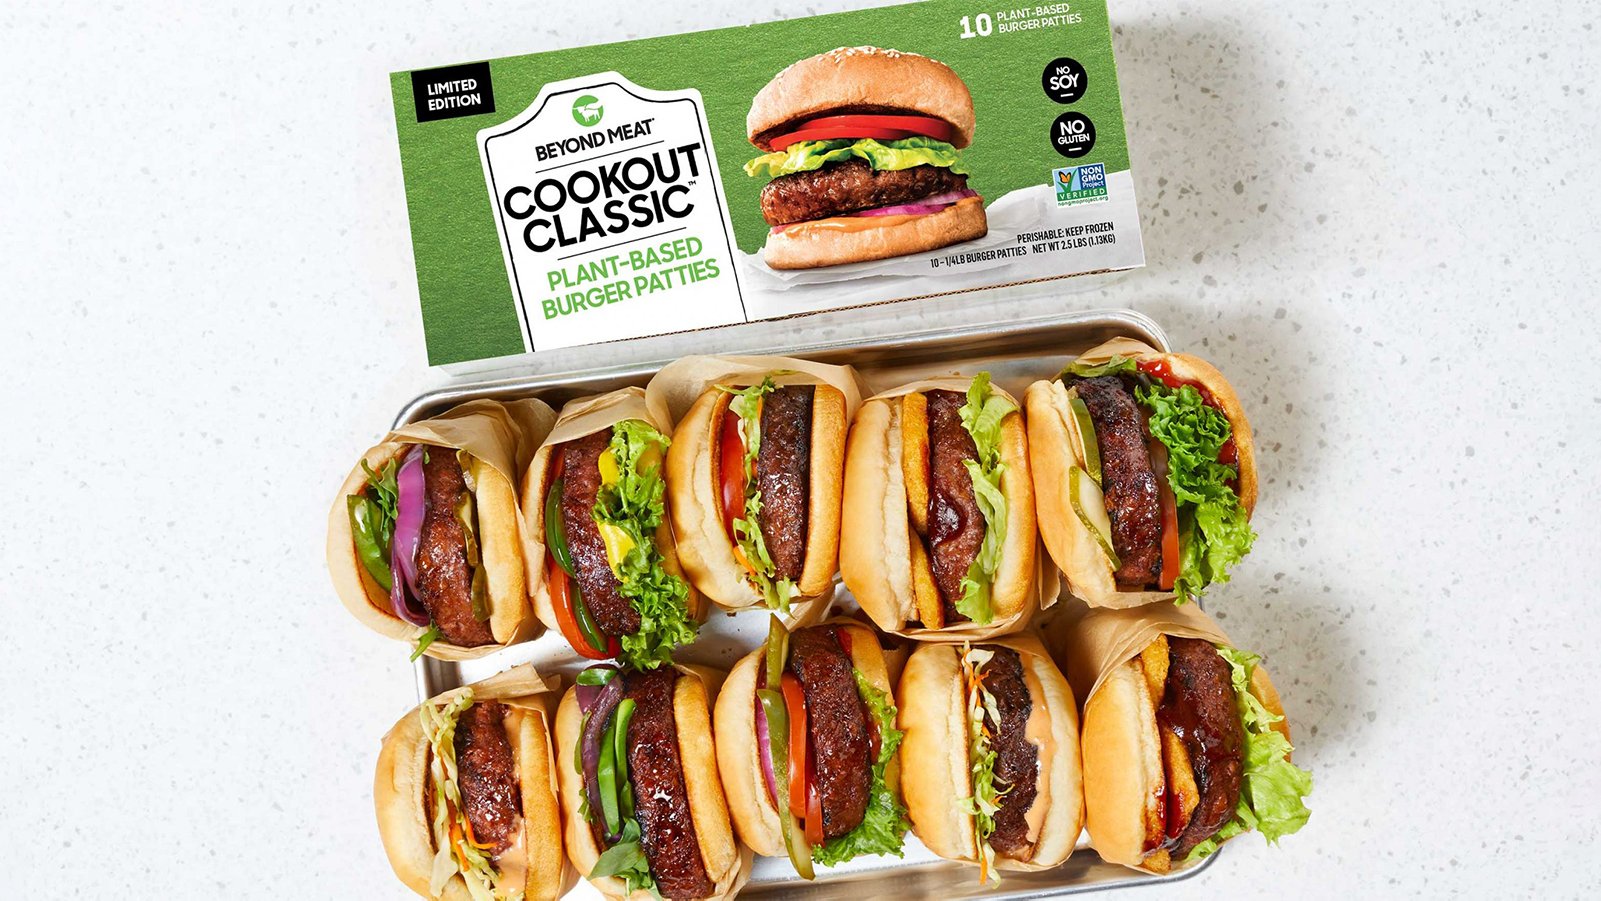 Beyond Meat's Total Revenue Has 'Potential' To Exceed $1 Billion By 2023, Say Experts